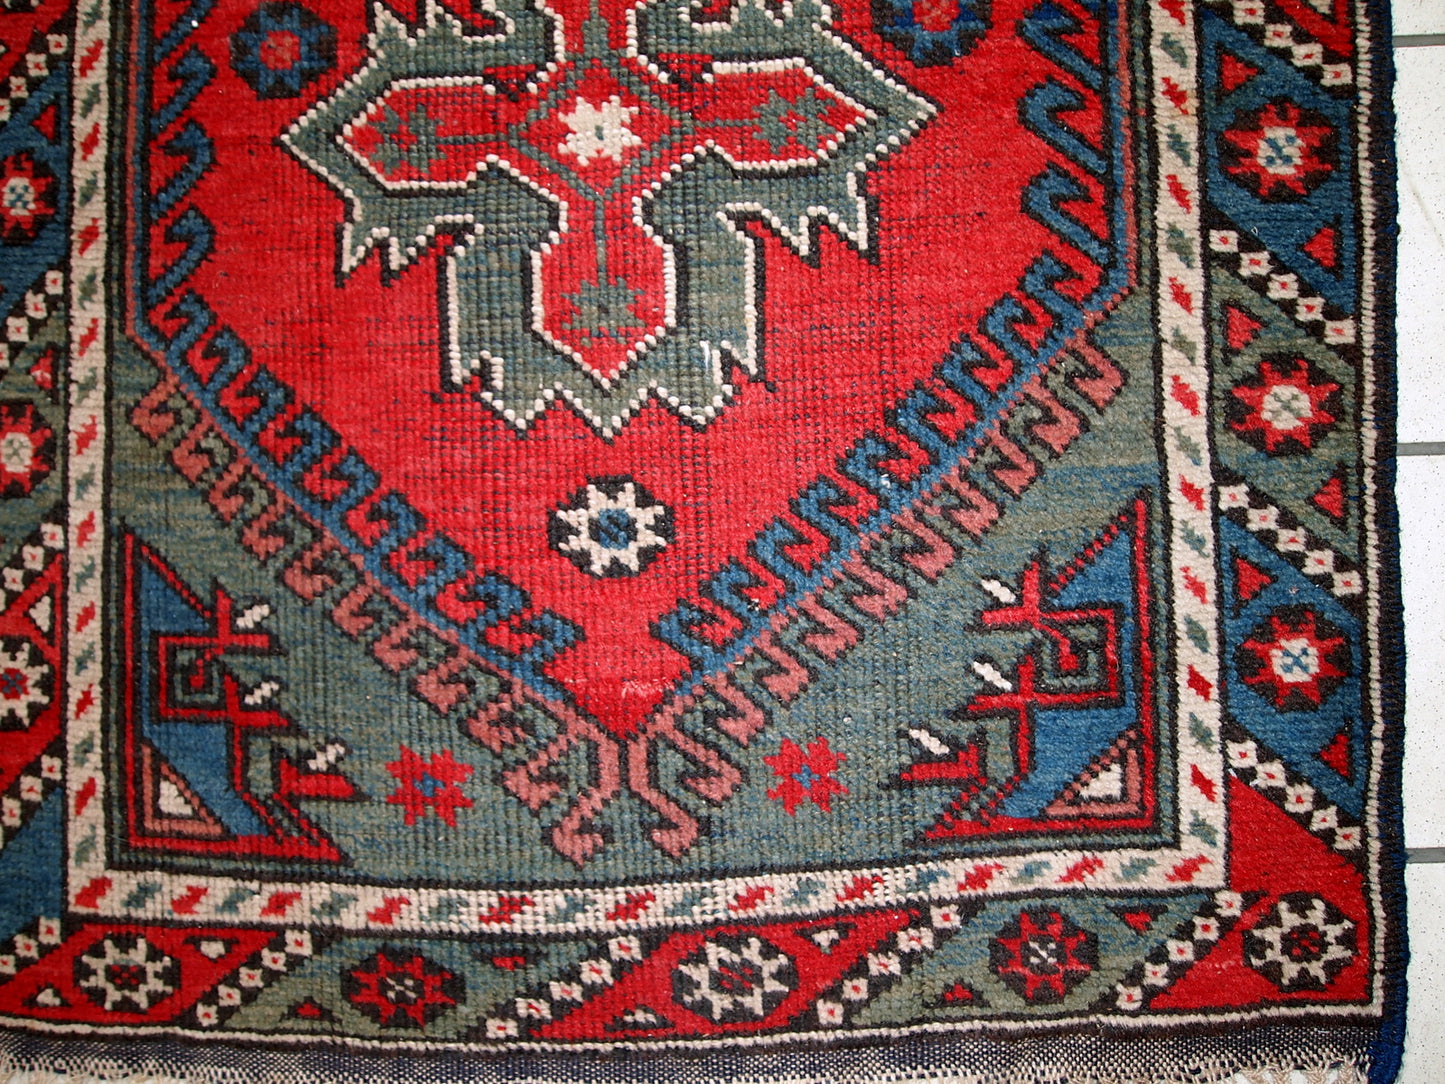 Turkish Anatolian antique handmade rug in bright red and green shades. The rug is in original good condition, it has some low pile. 